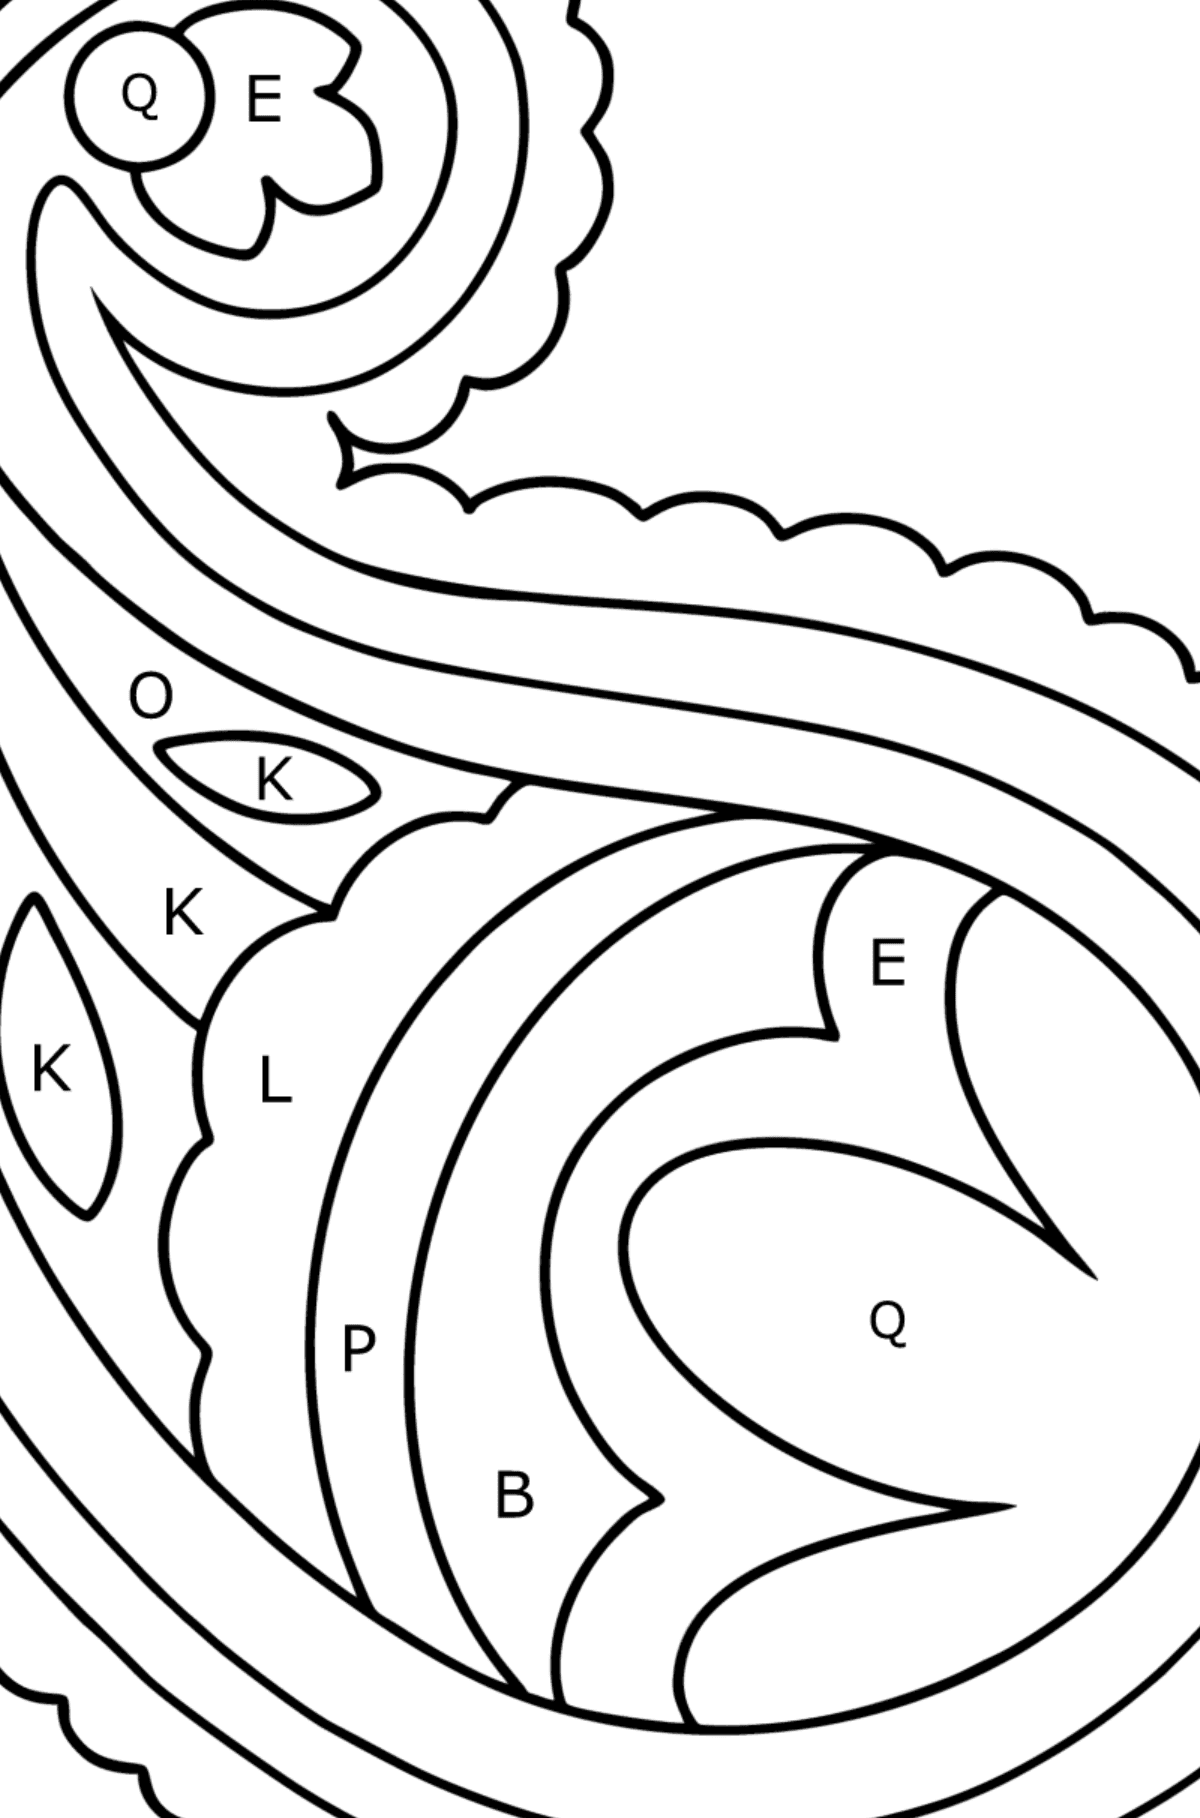 Paisley coloring page - 16 Elements - Coloring by Letters for Kids